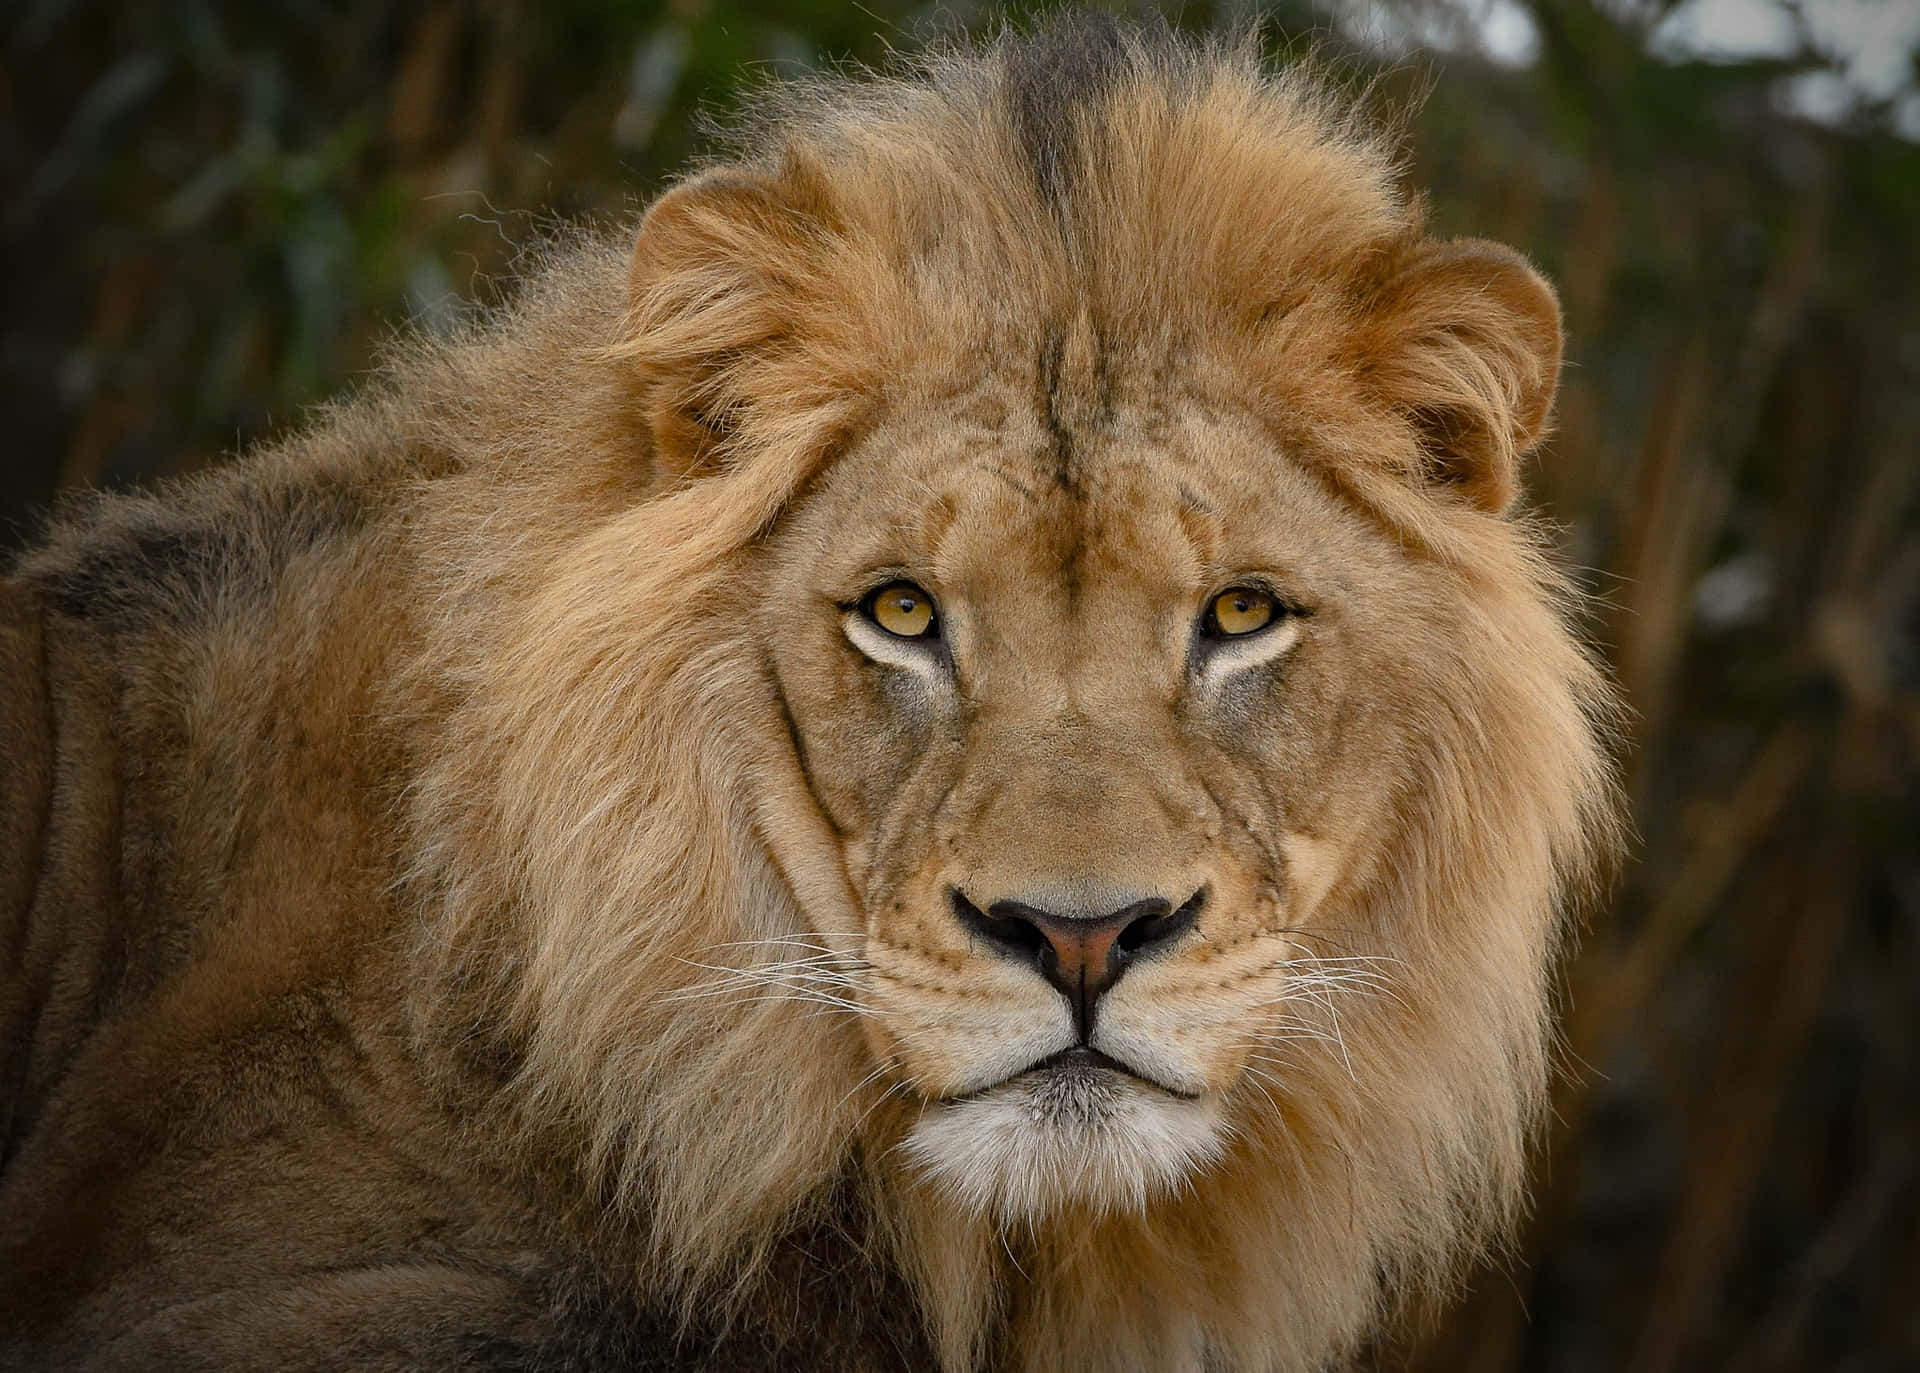 The Majestic Face of a Lion